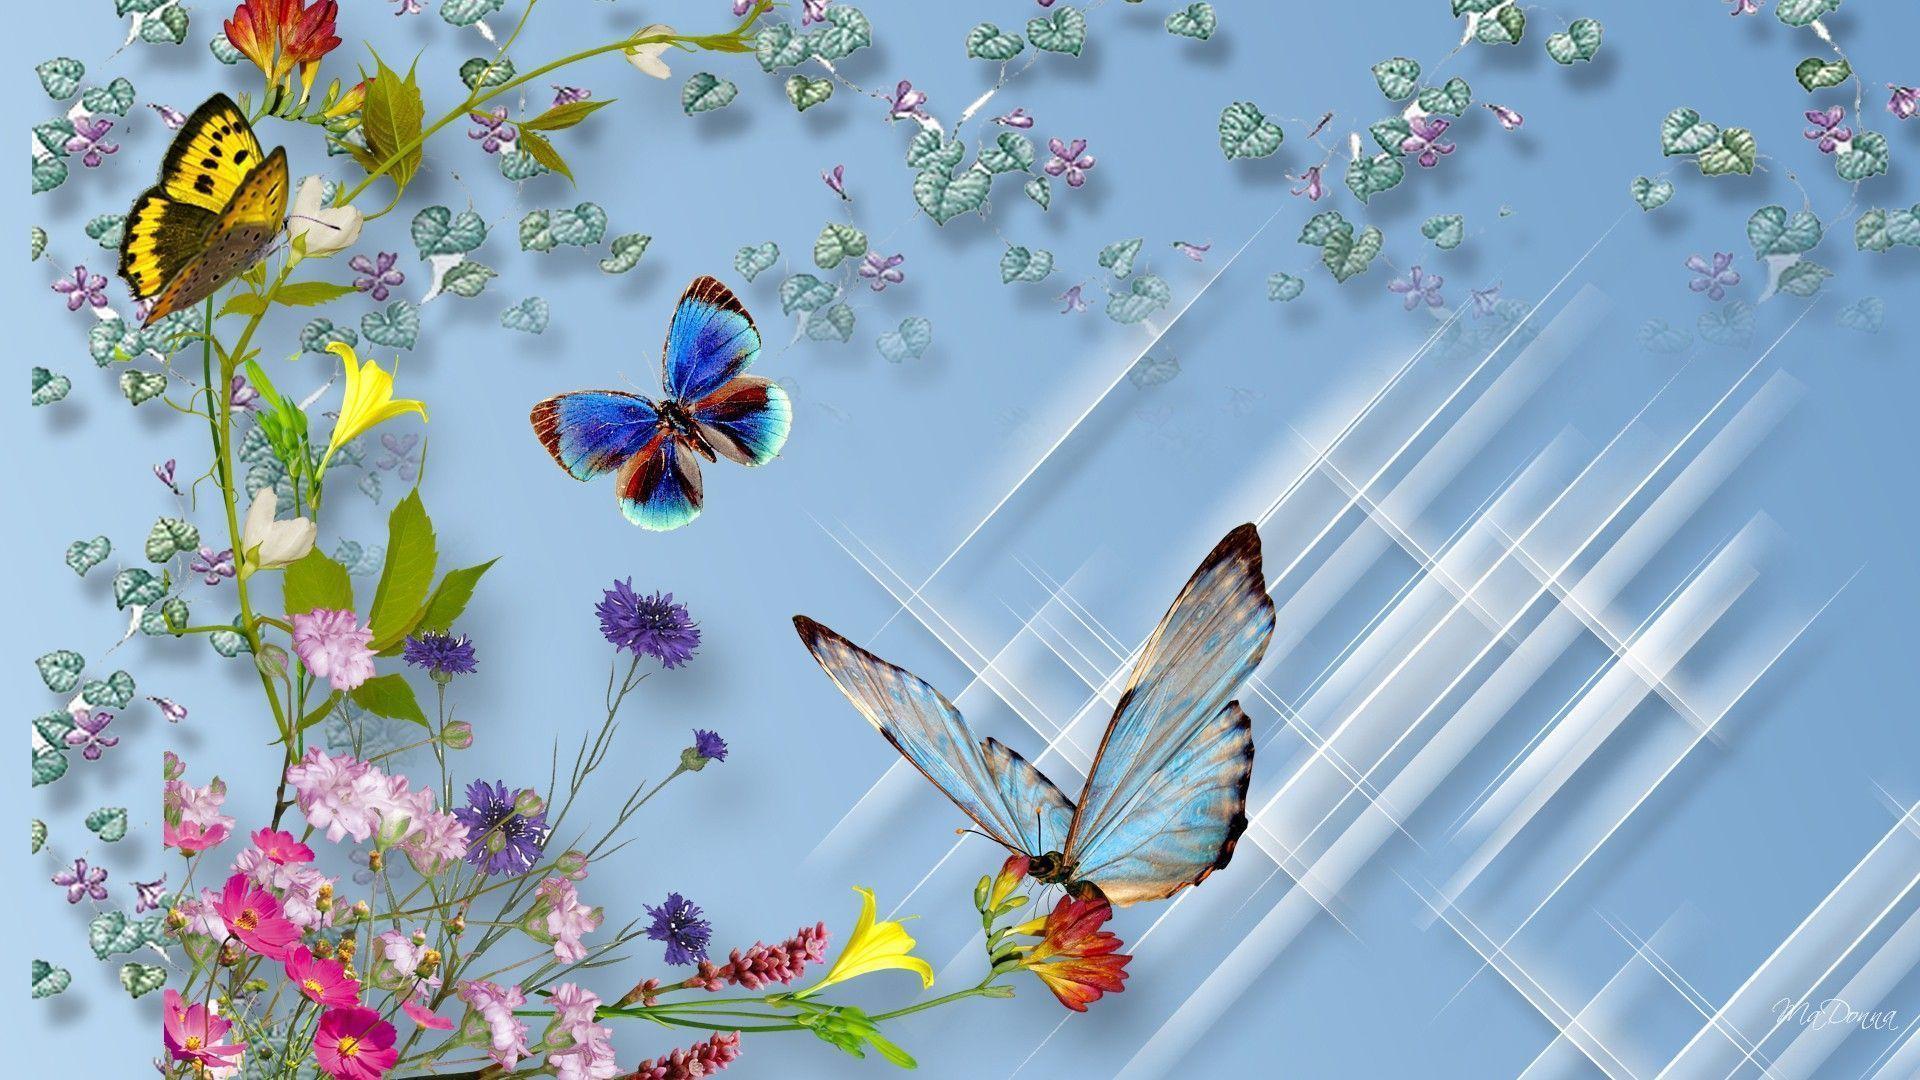 Flowers For > Flower With Butterfly Wallpaper HD